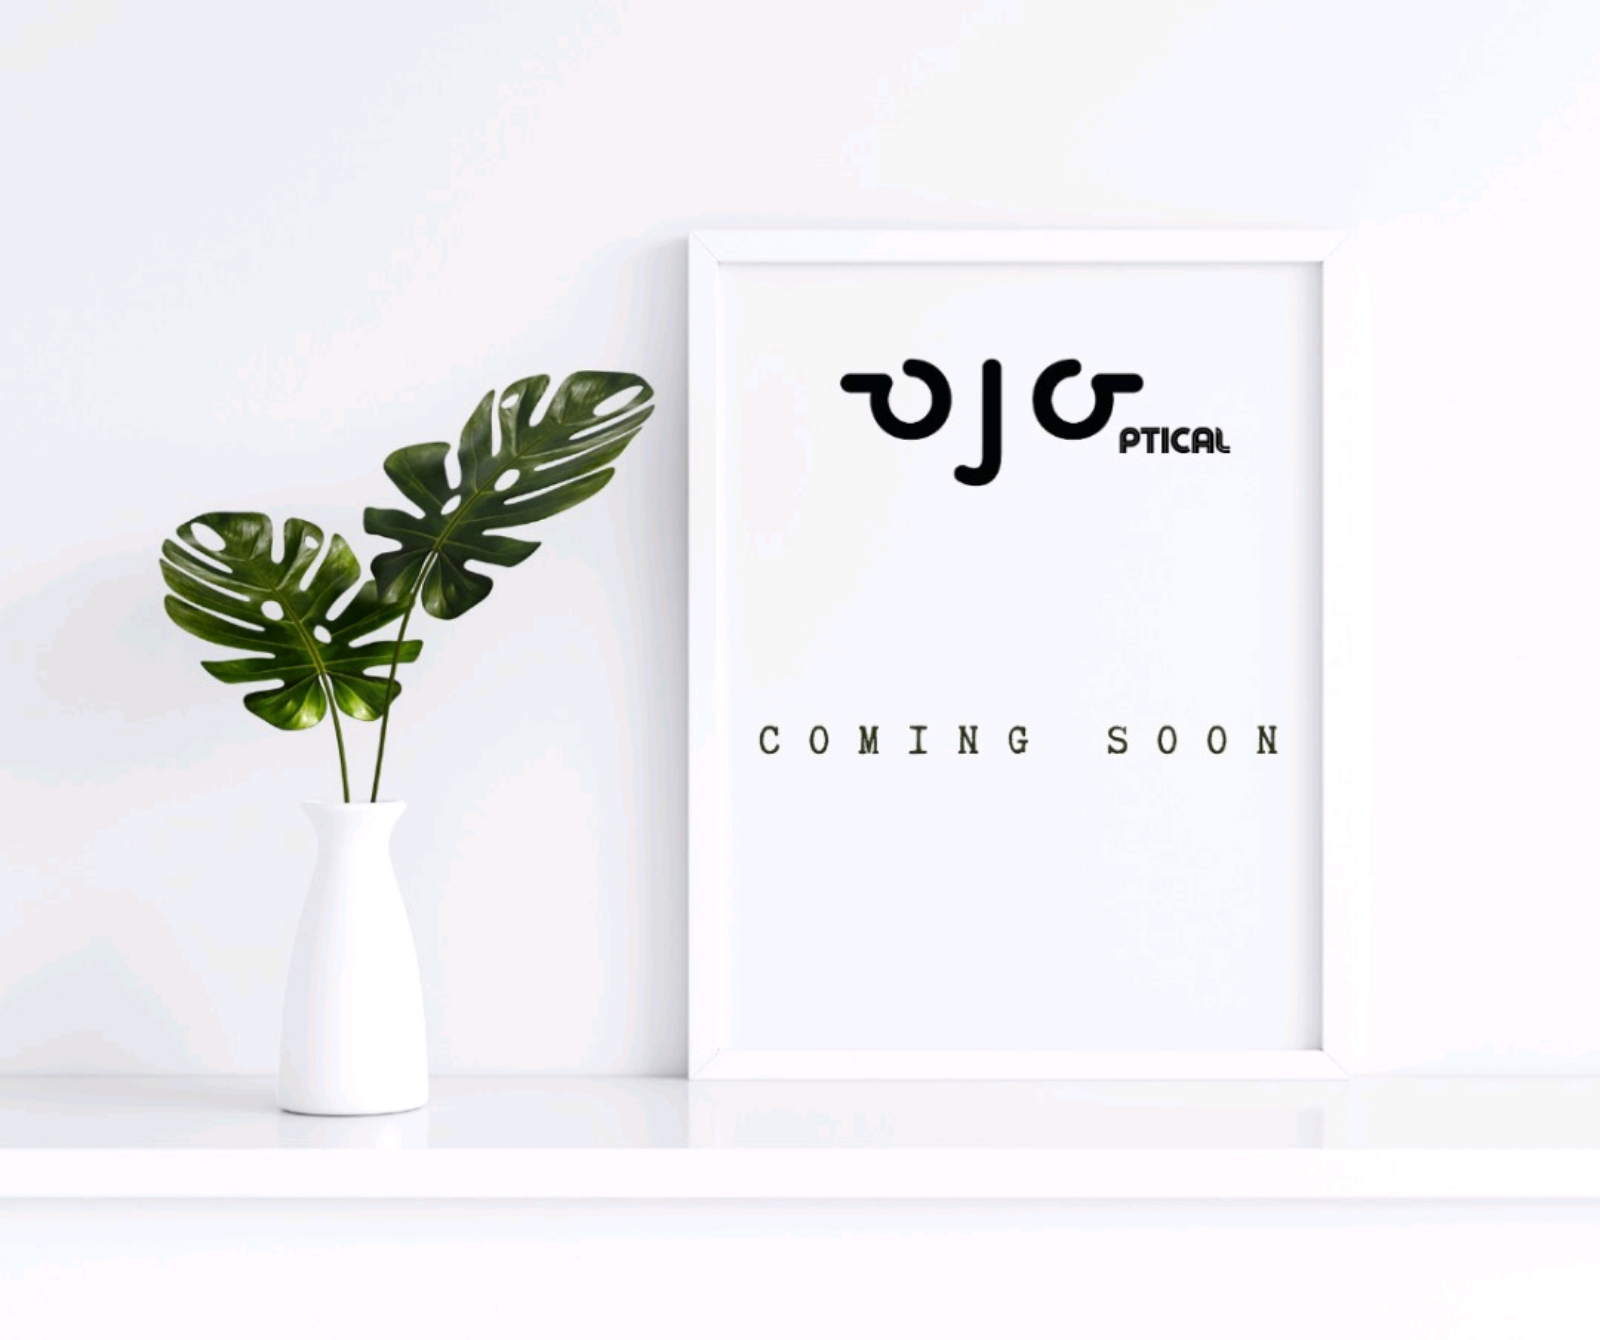 New Outlet is Coming soon